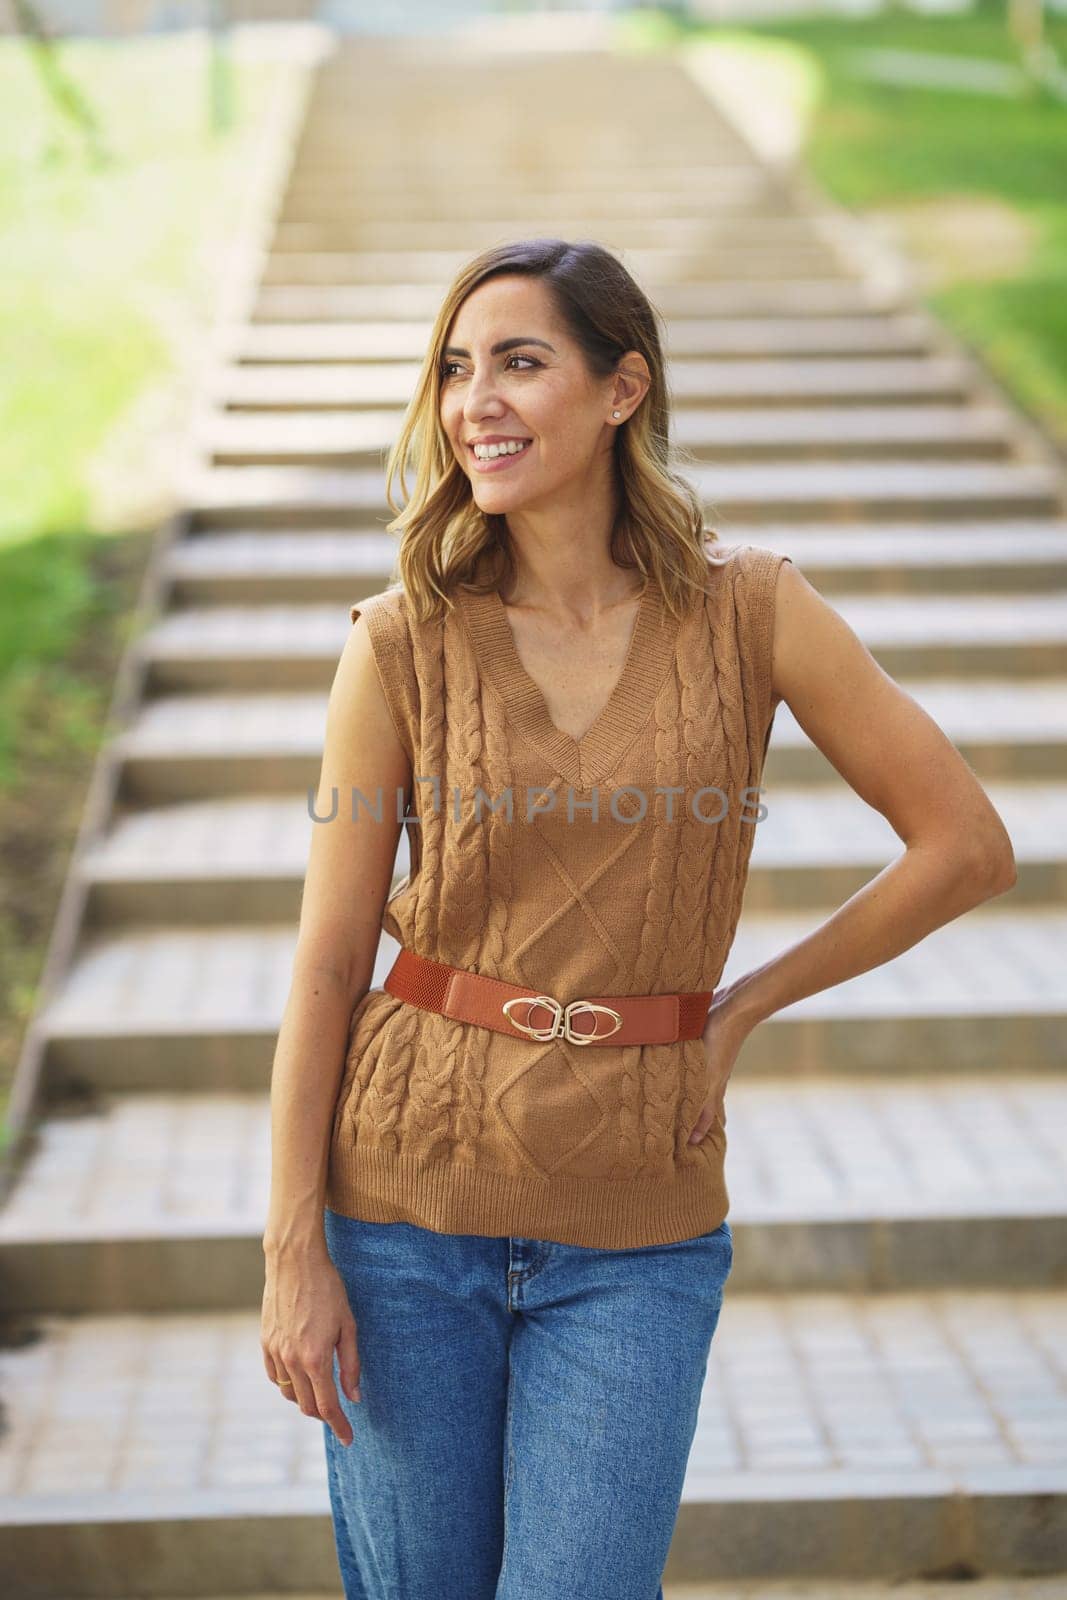 Positive adult female in stylish knitted top holding hand on waist and looking away with smile on blurred background of steps